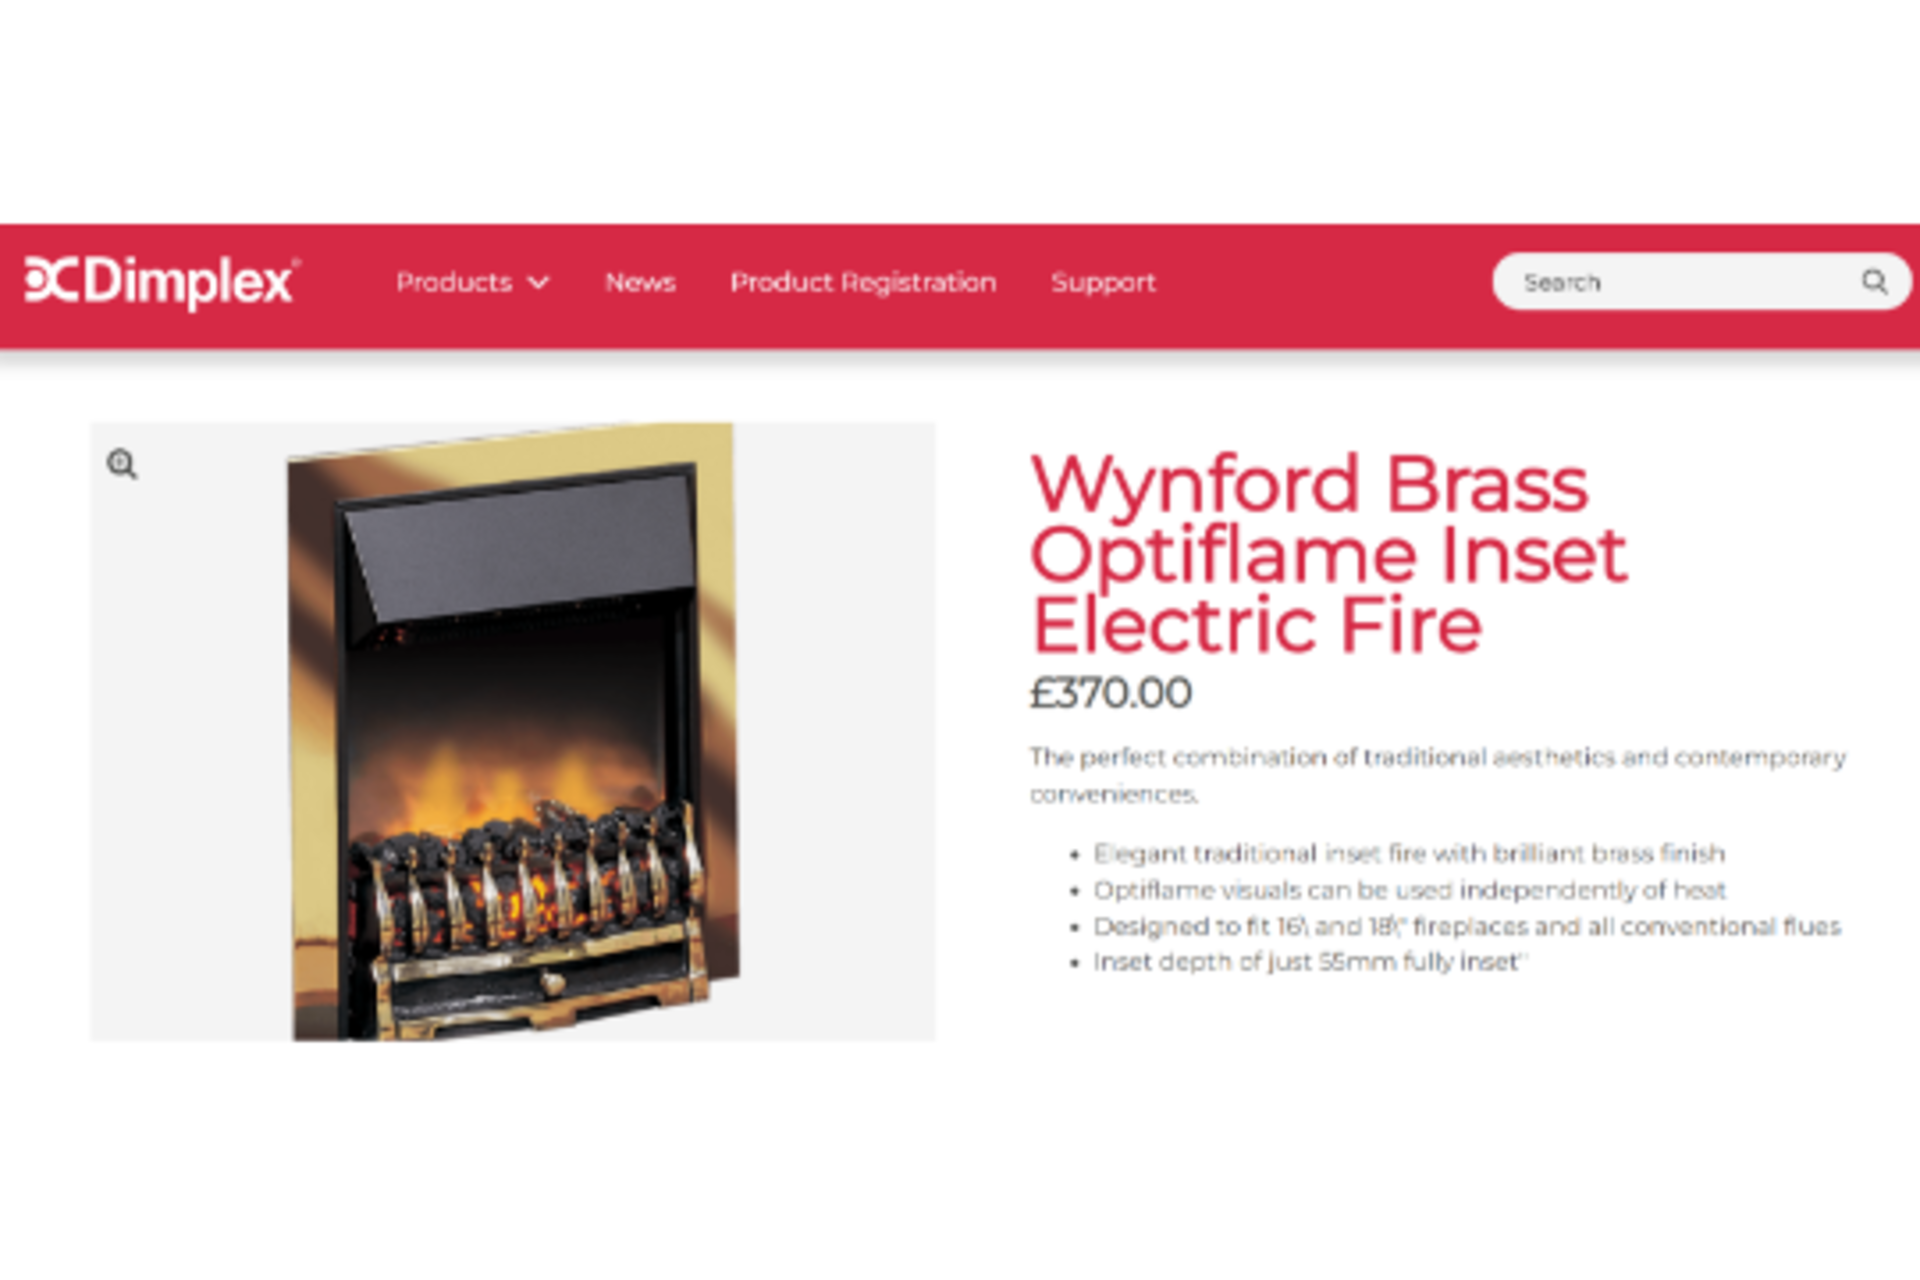 TRADE LOT 4 X BRAND NEW BOXED Dimplex Wynford Brass Optiflame Inset Electric Fire RRP £370.00